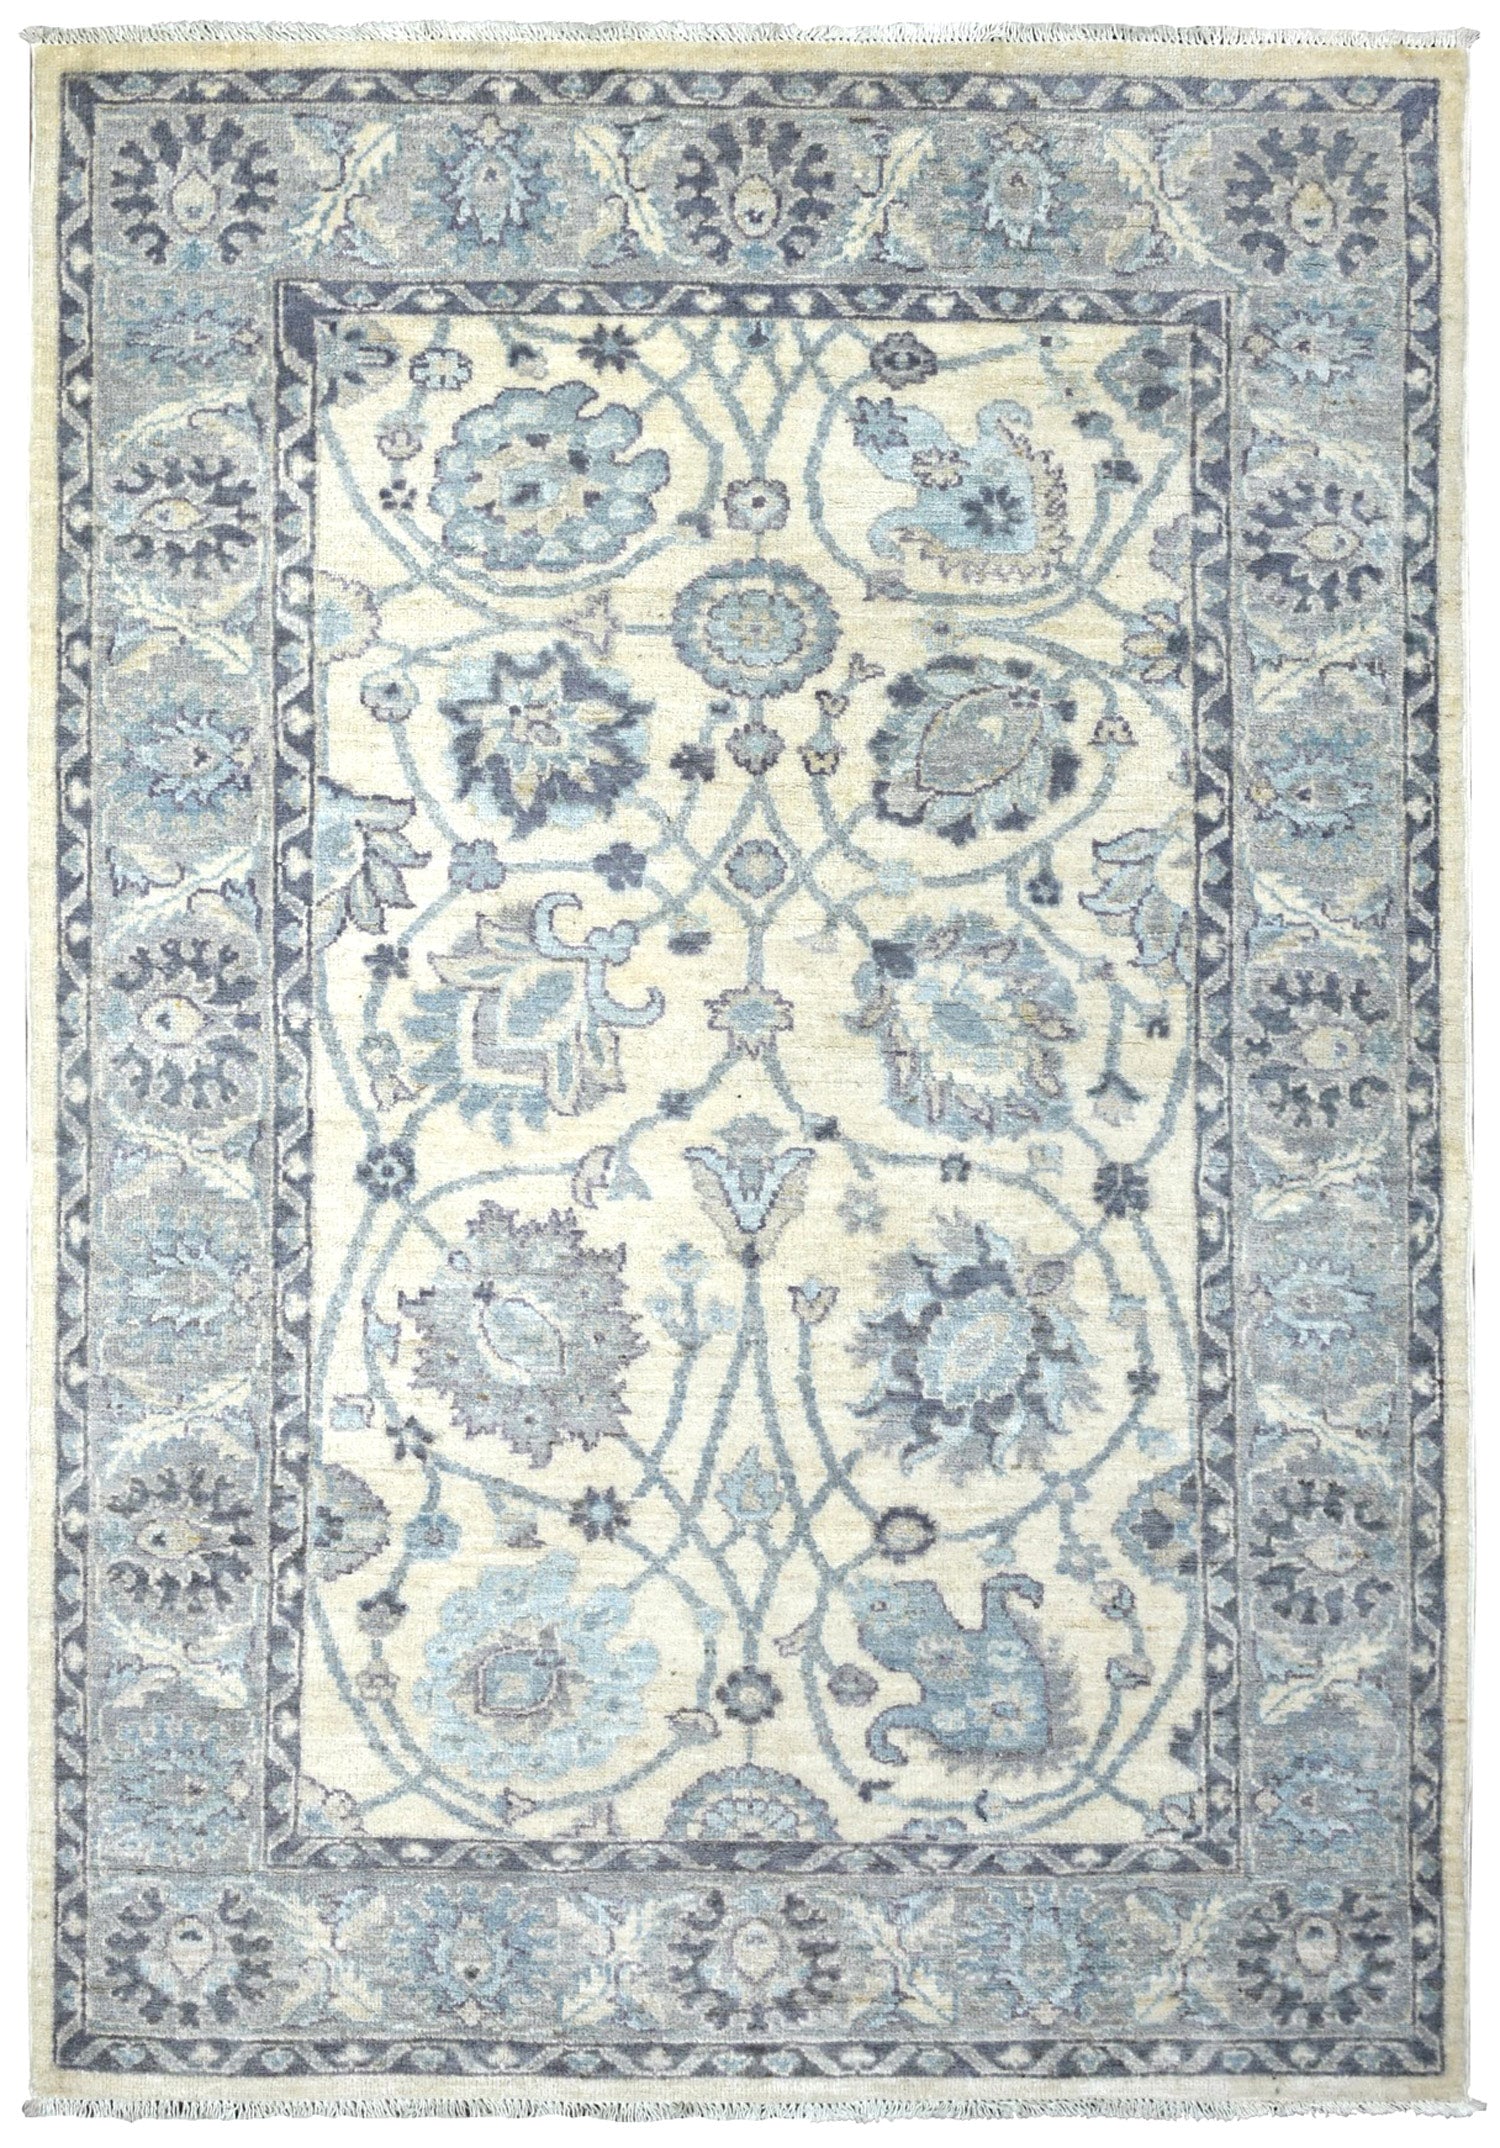 Sultanabad Handwoven Transitional Rug